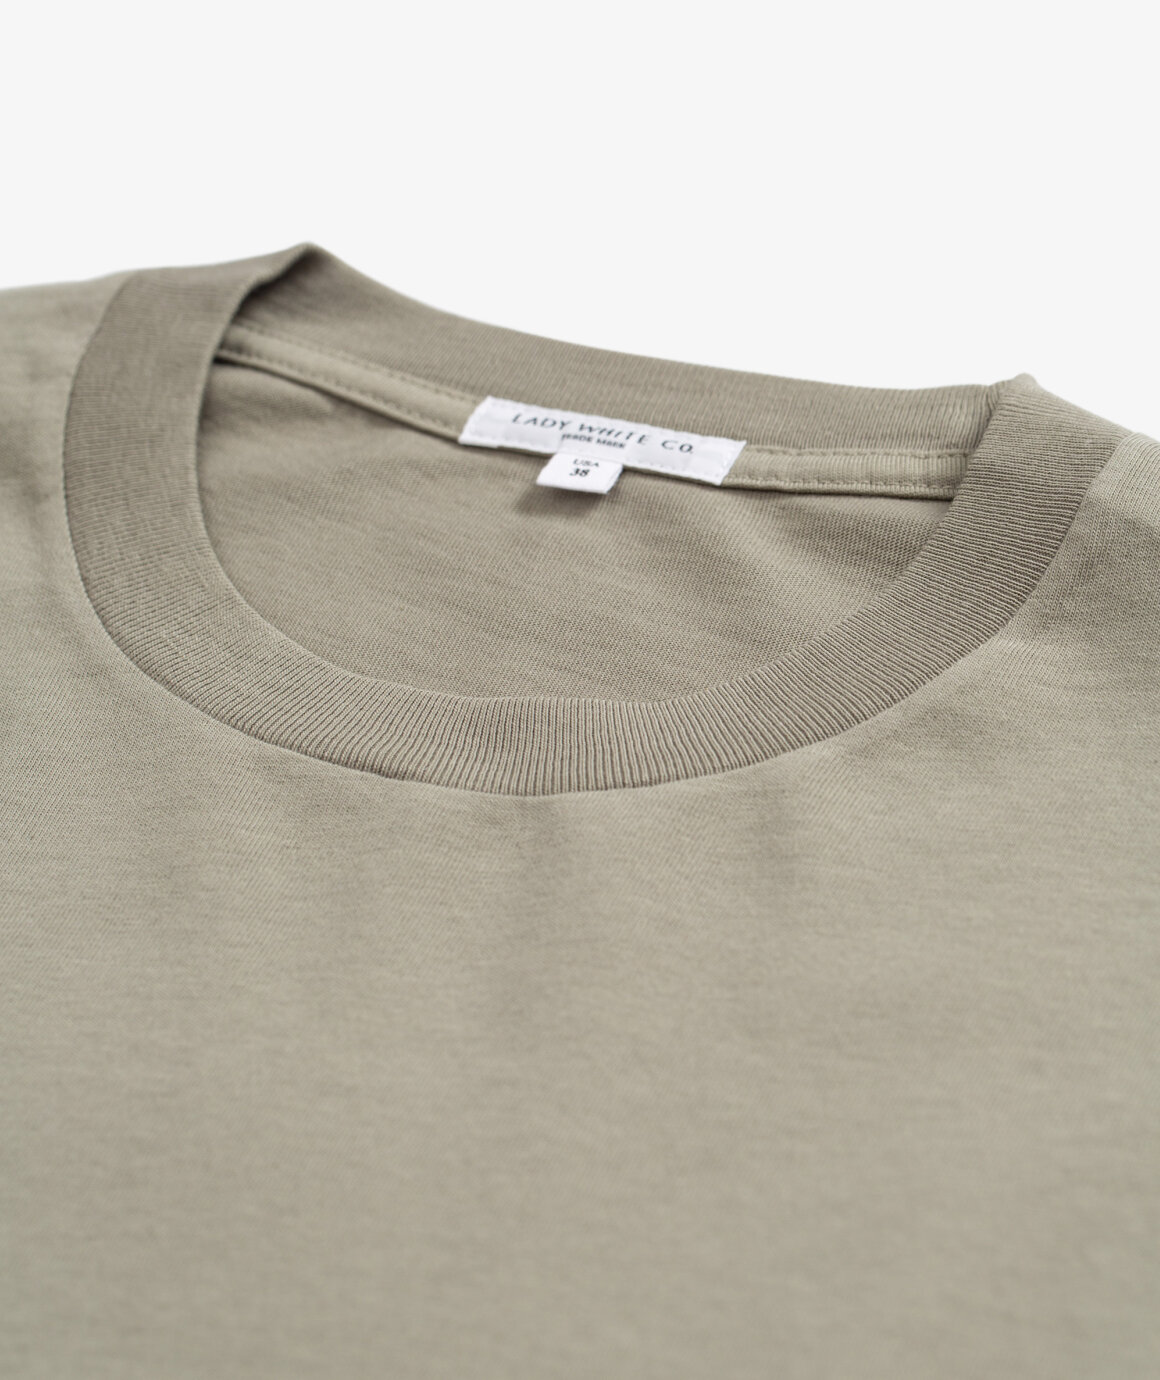 Norse Store | Shipping Worldwide - Lady White Co. Boxy L/S Tee ...